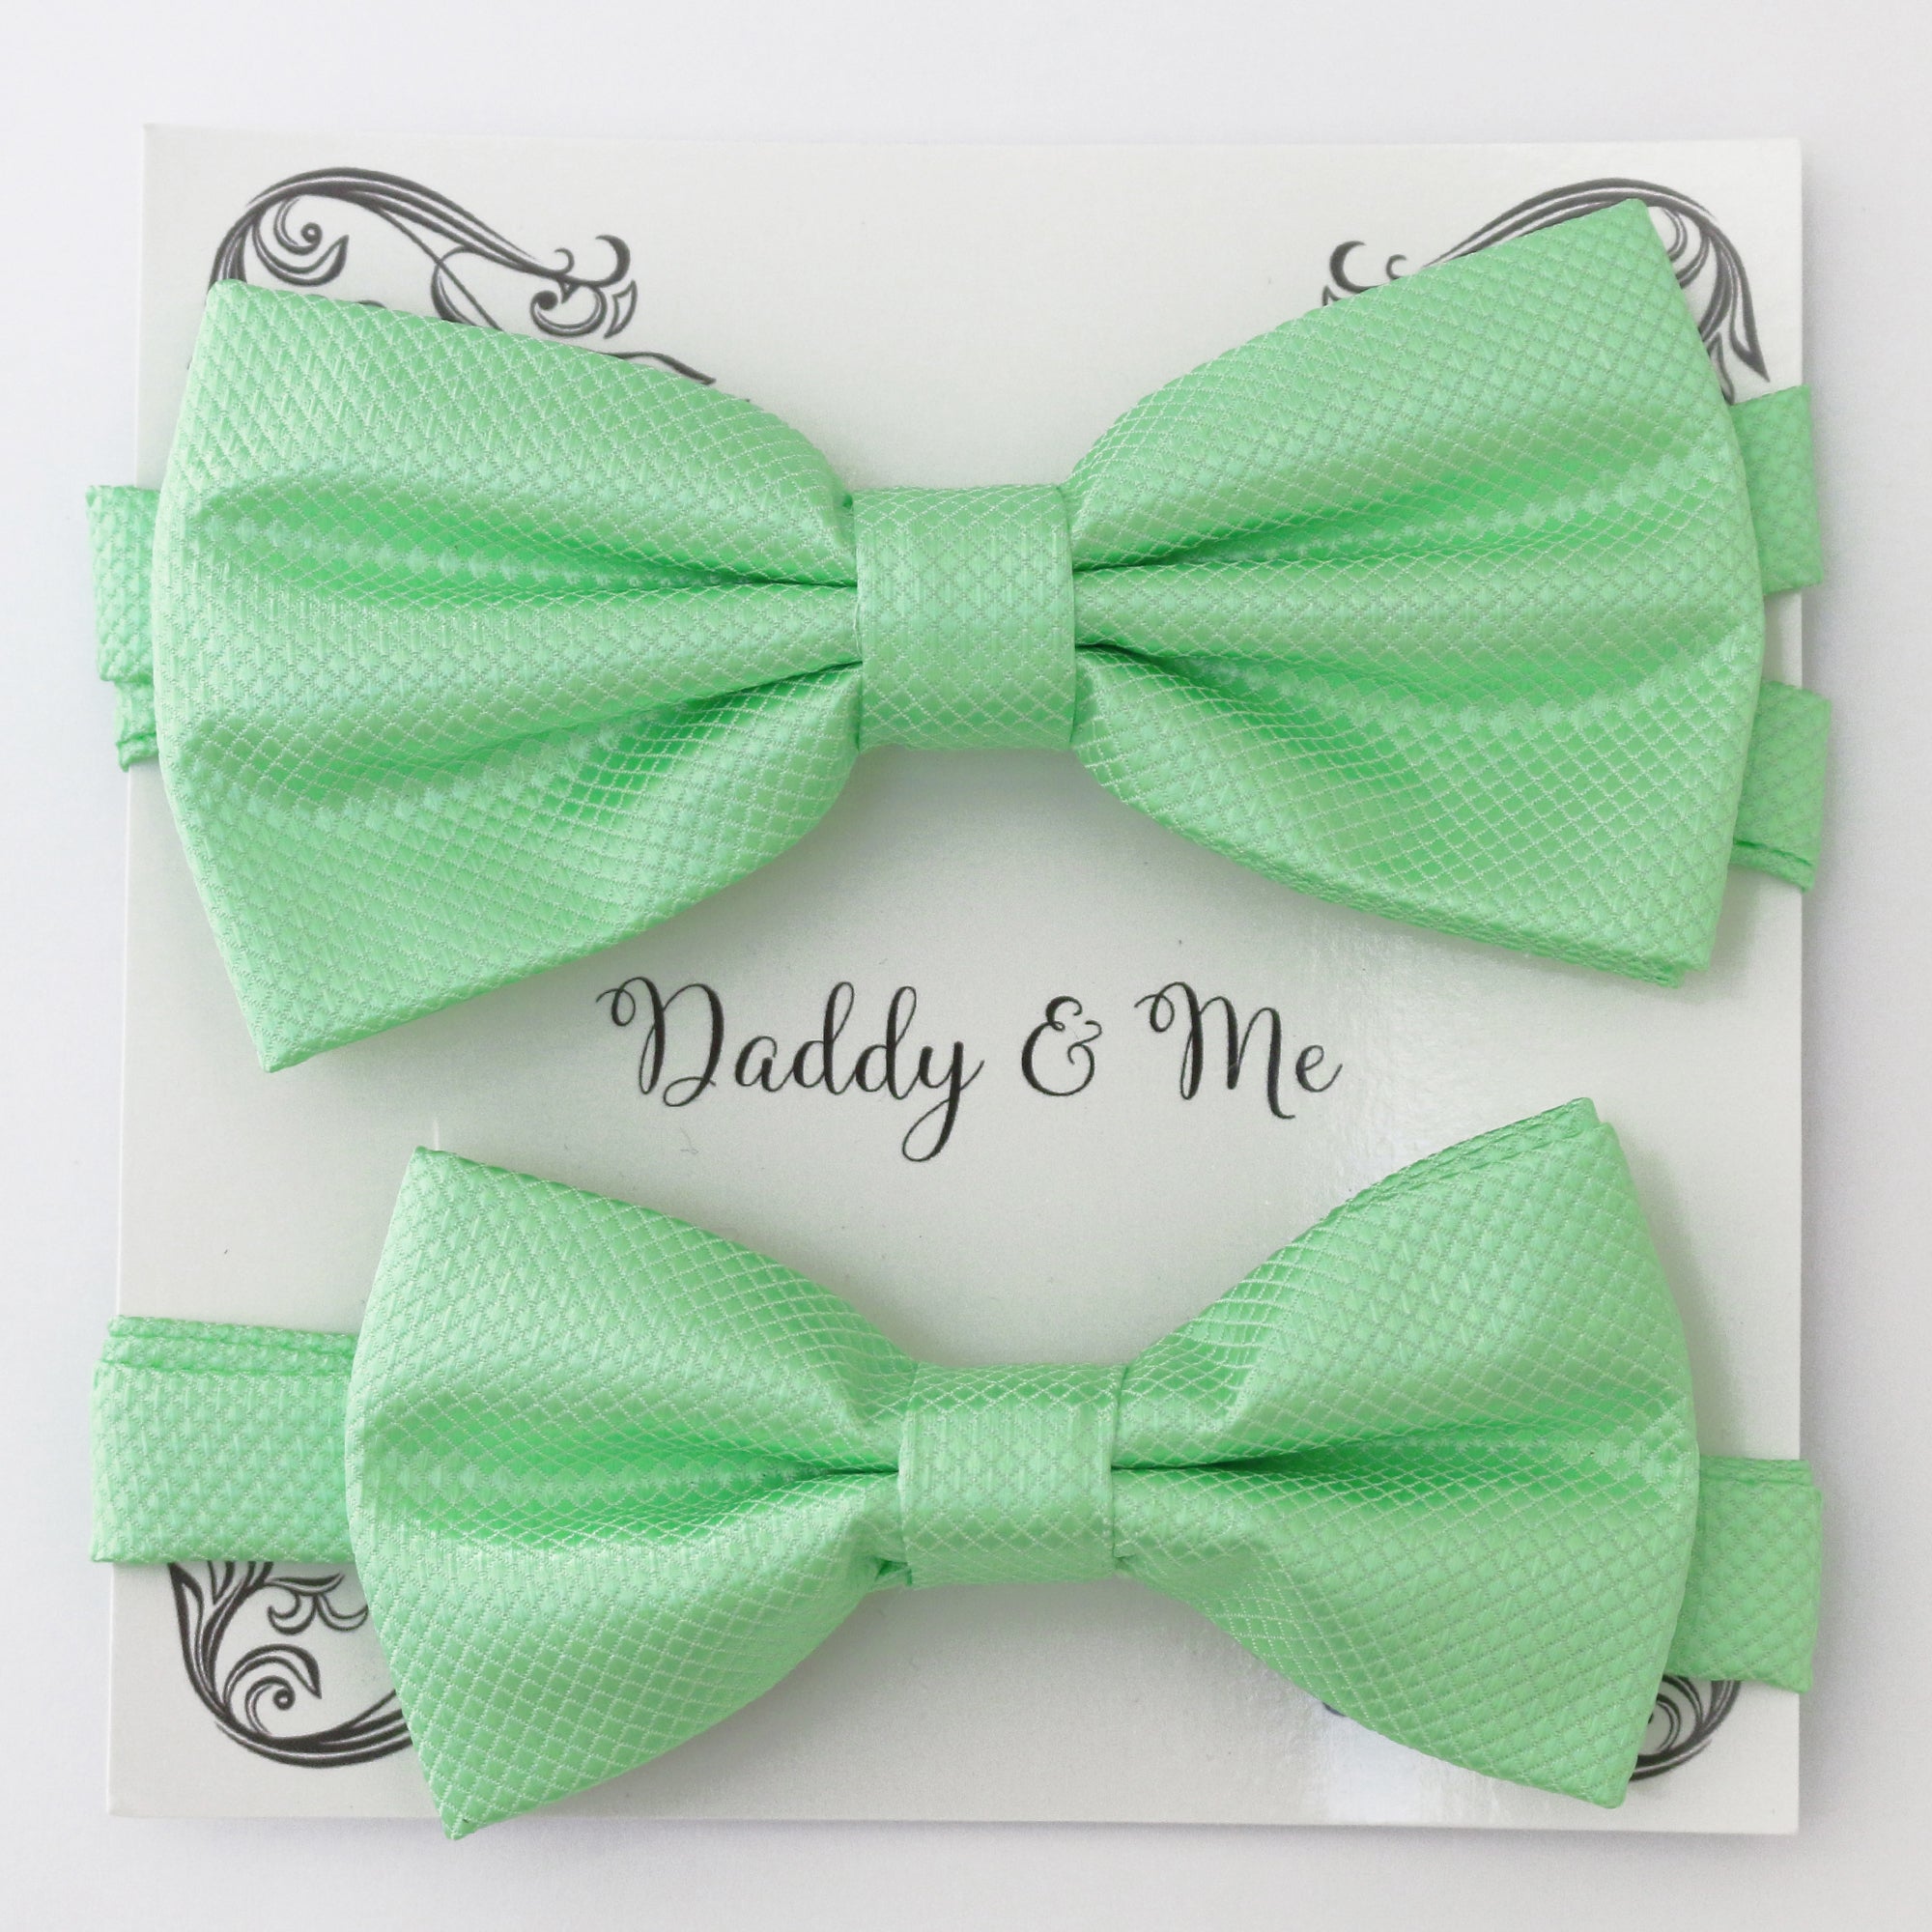 Mint green Bow tie set for daddy and son, Daddy me gift set, Grandpa and me, Father son matching, Toddler bow tie, daddy me bow tie gift